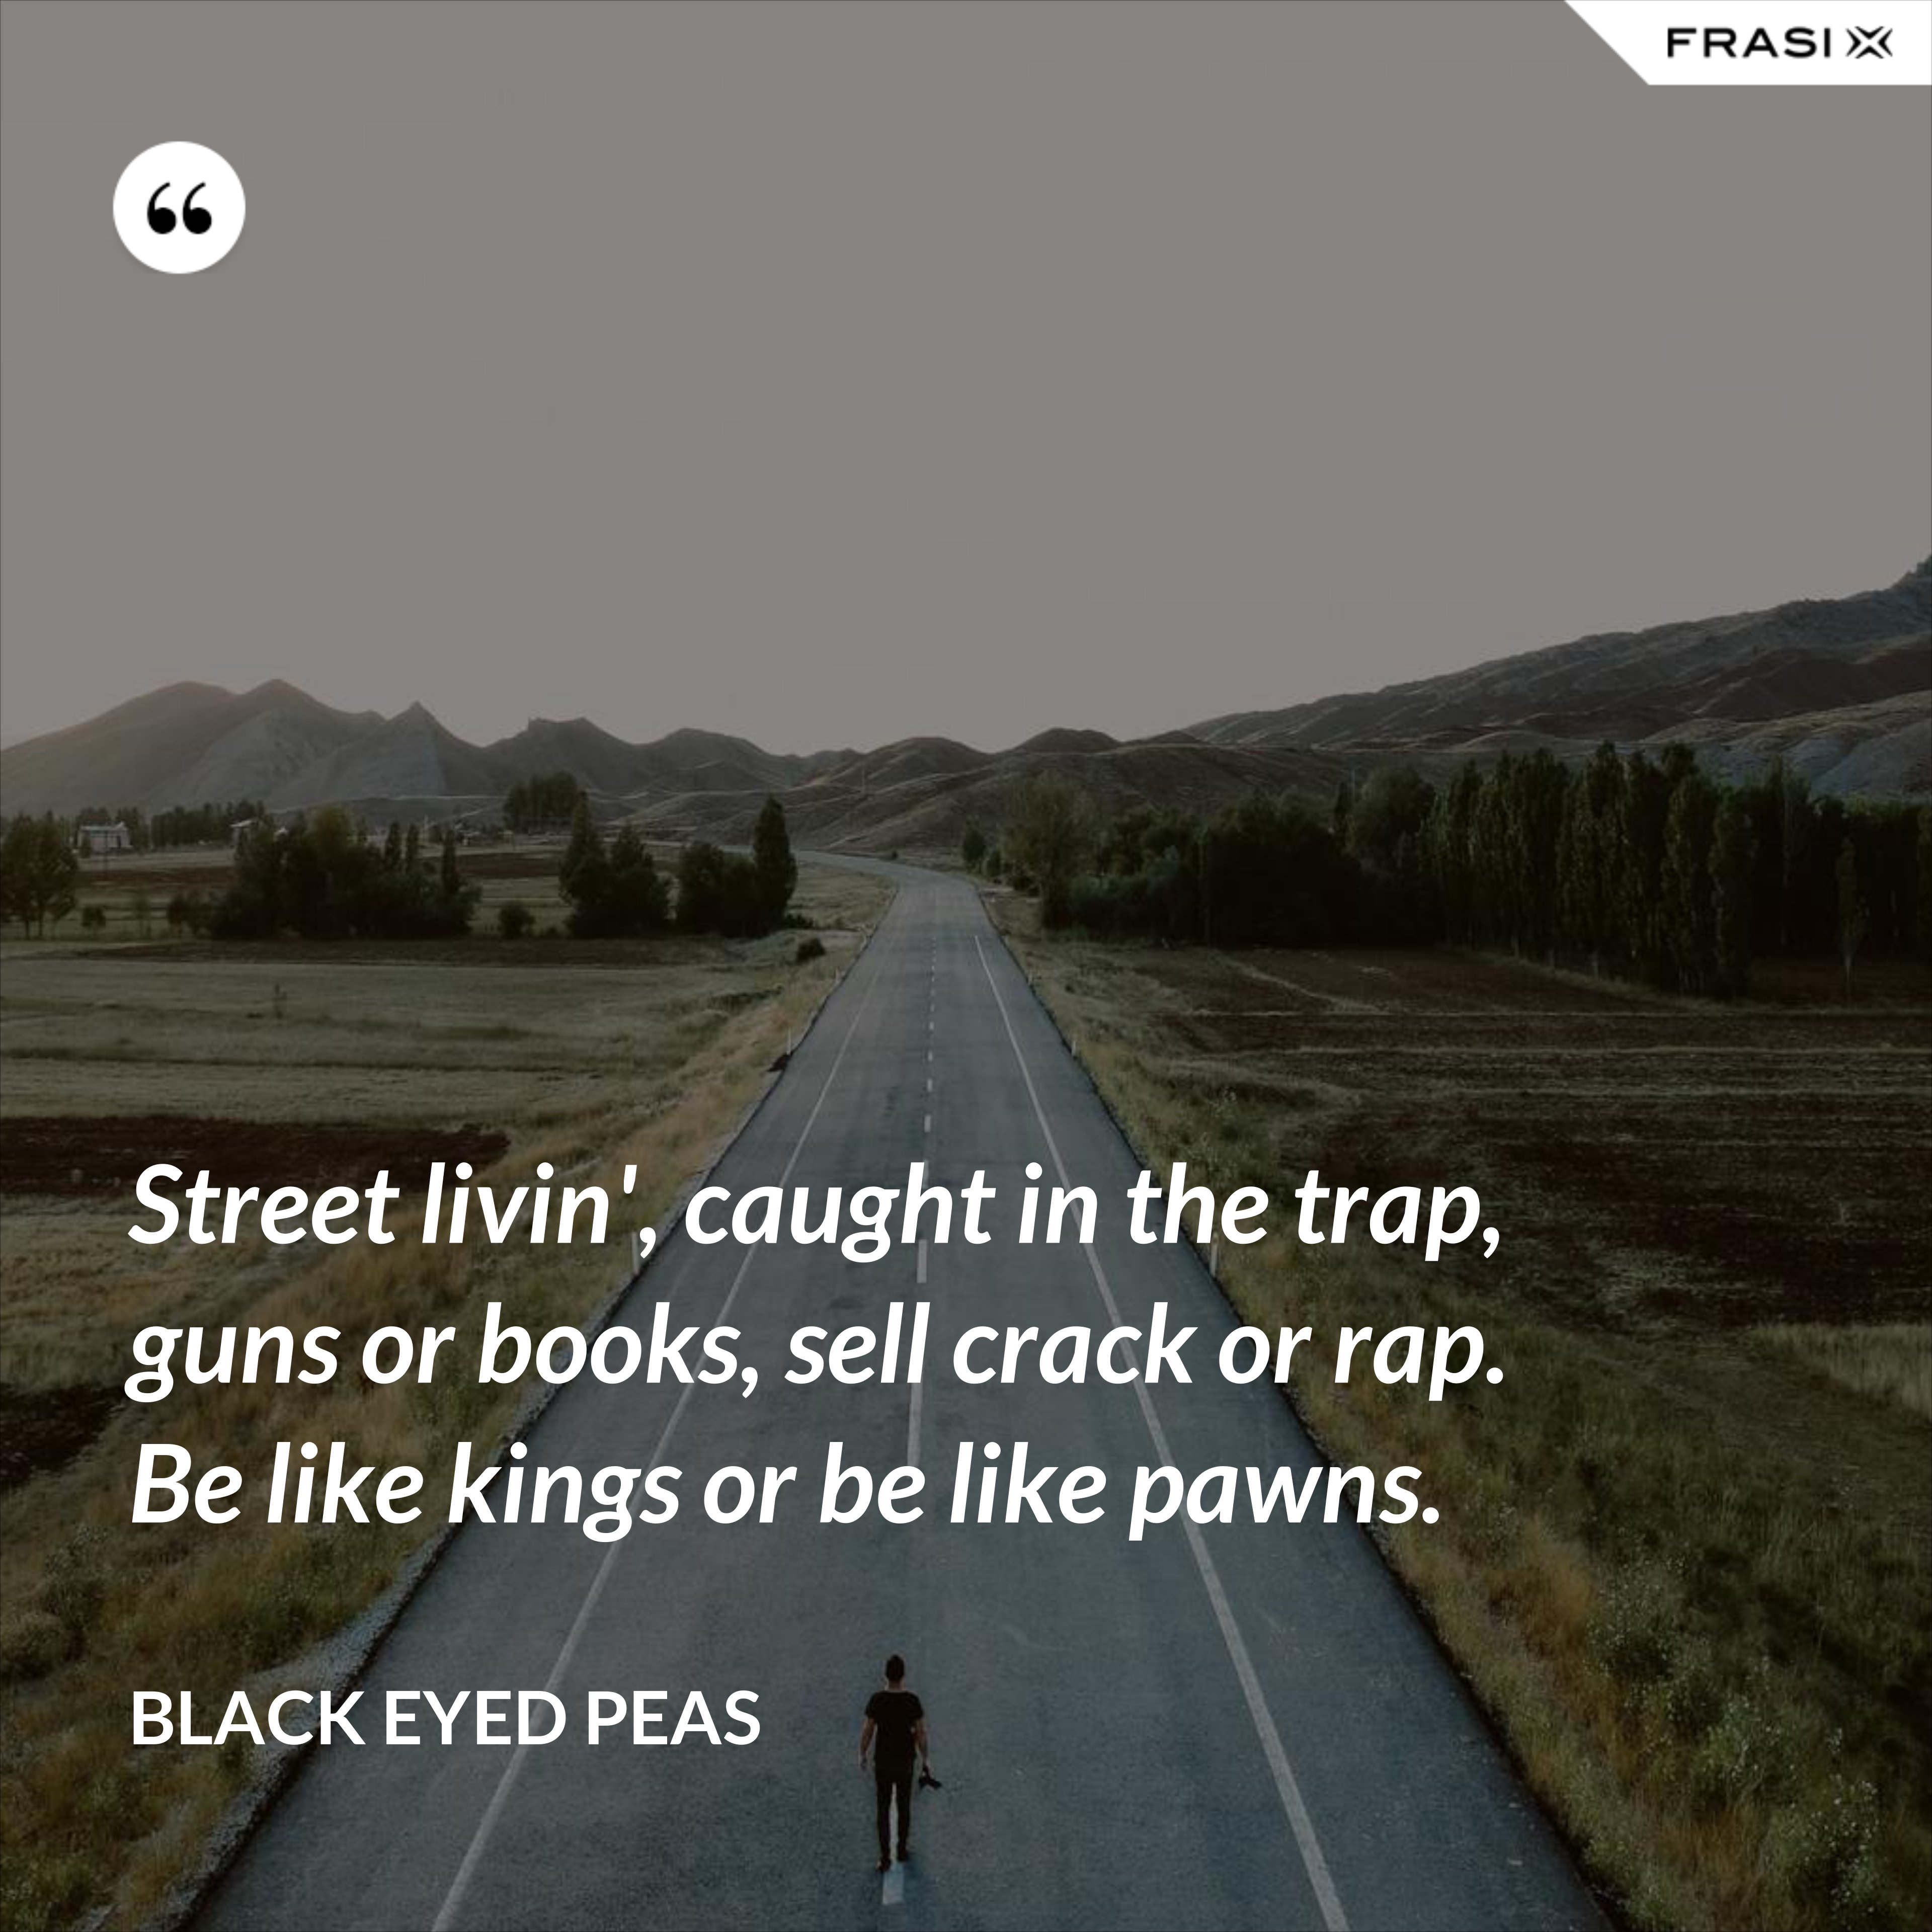 Street livin', caught in the trap, guns or books, sell crack or rap. Be like kings or be like pawns. - Black Eyed Peas